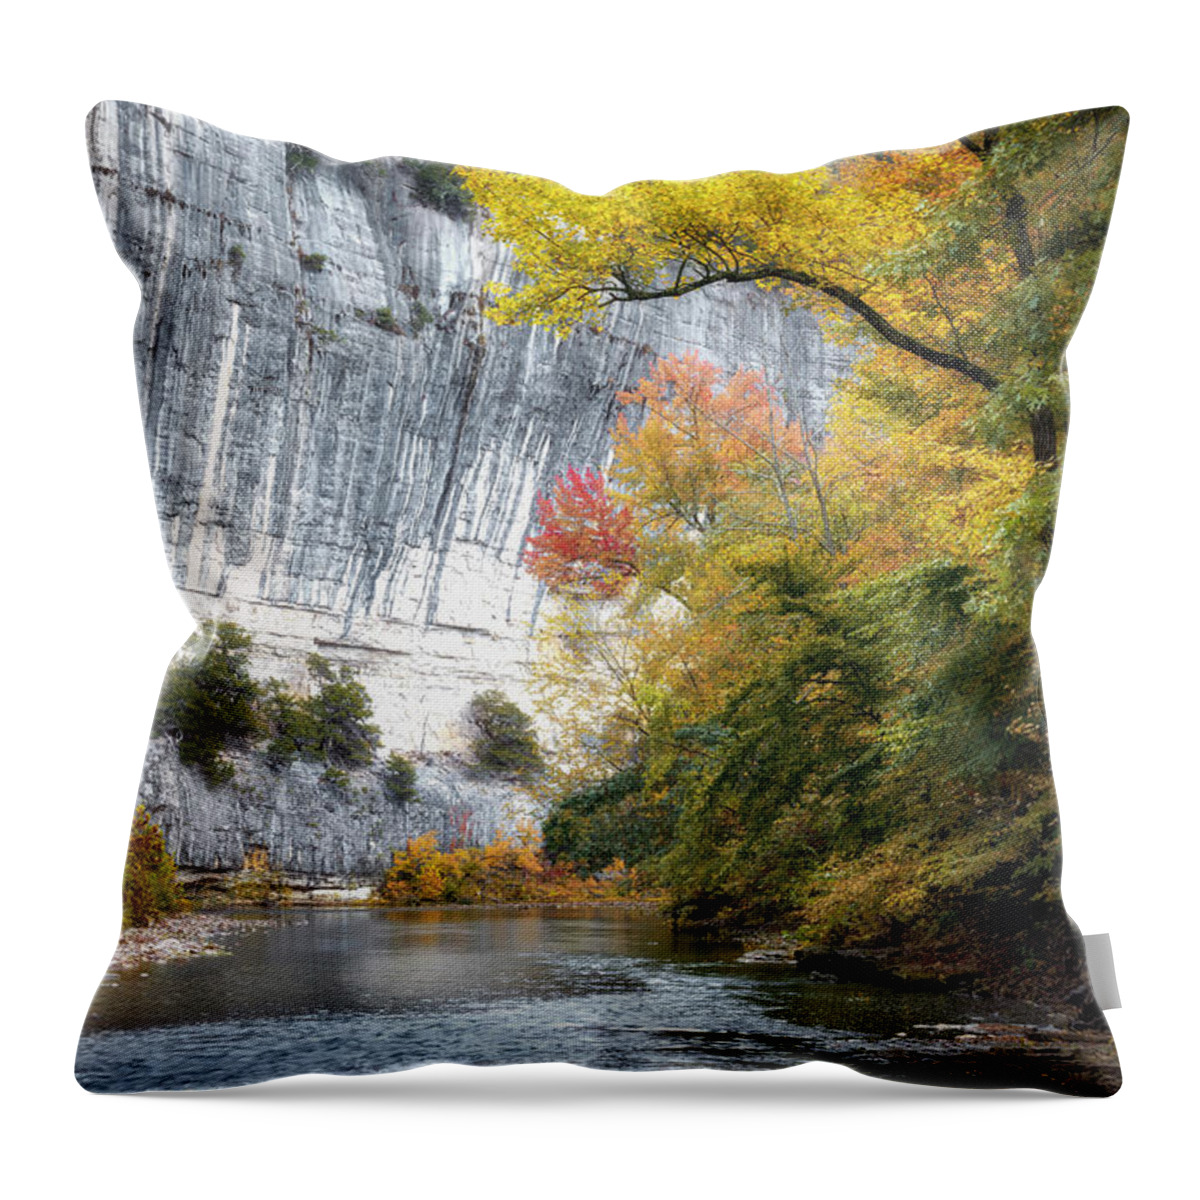 Buffalo River Throw Pillow featuring the photograph The River Under The Cliff by James Barber